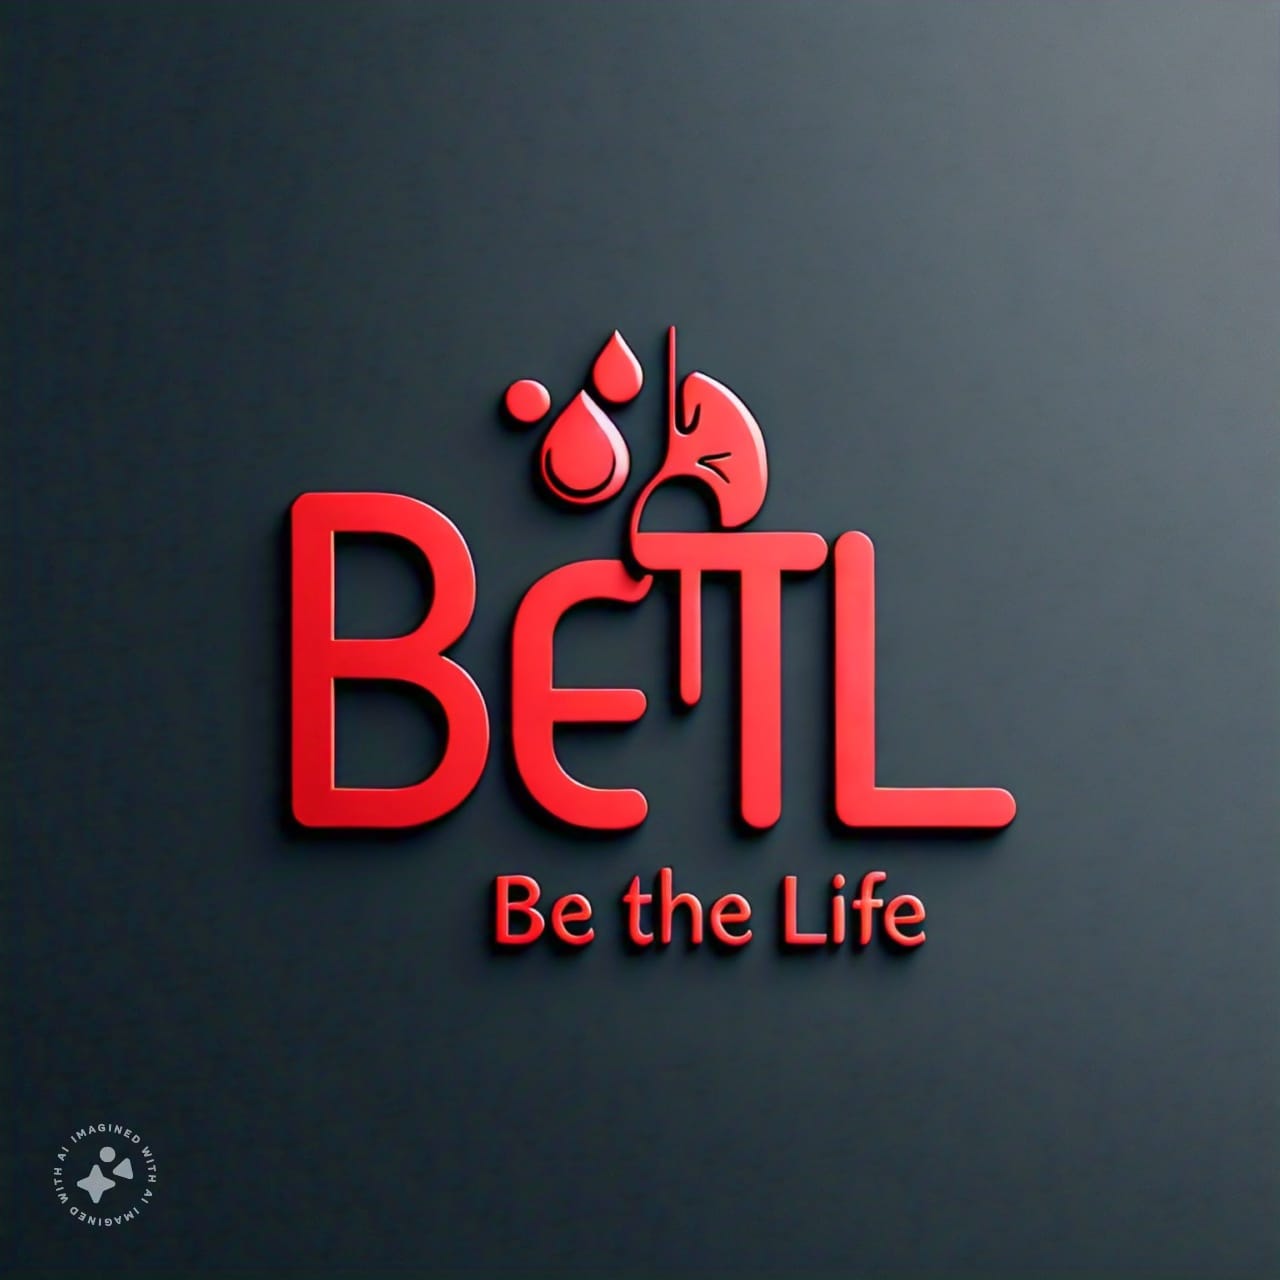 "BeTL-Be The Life"